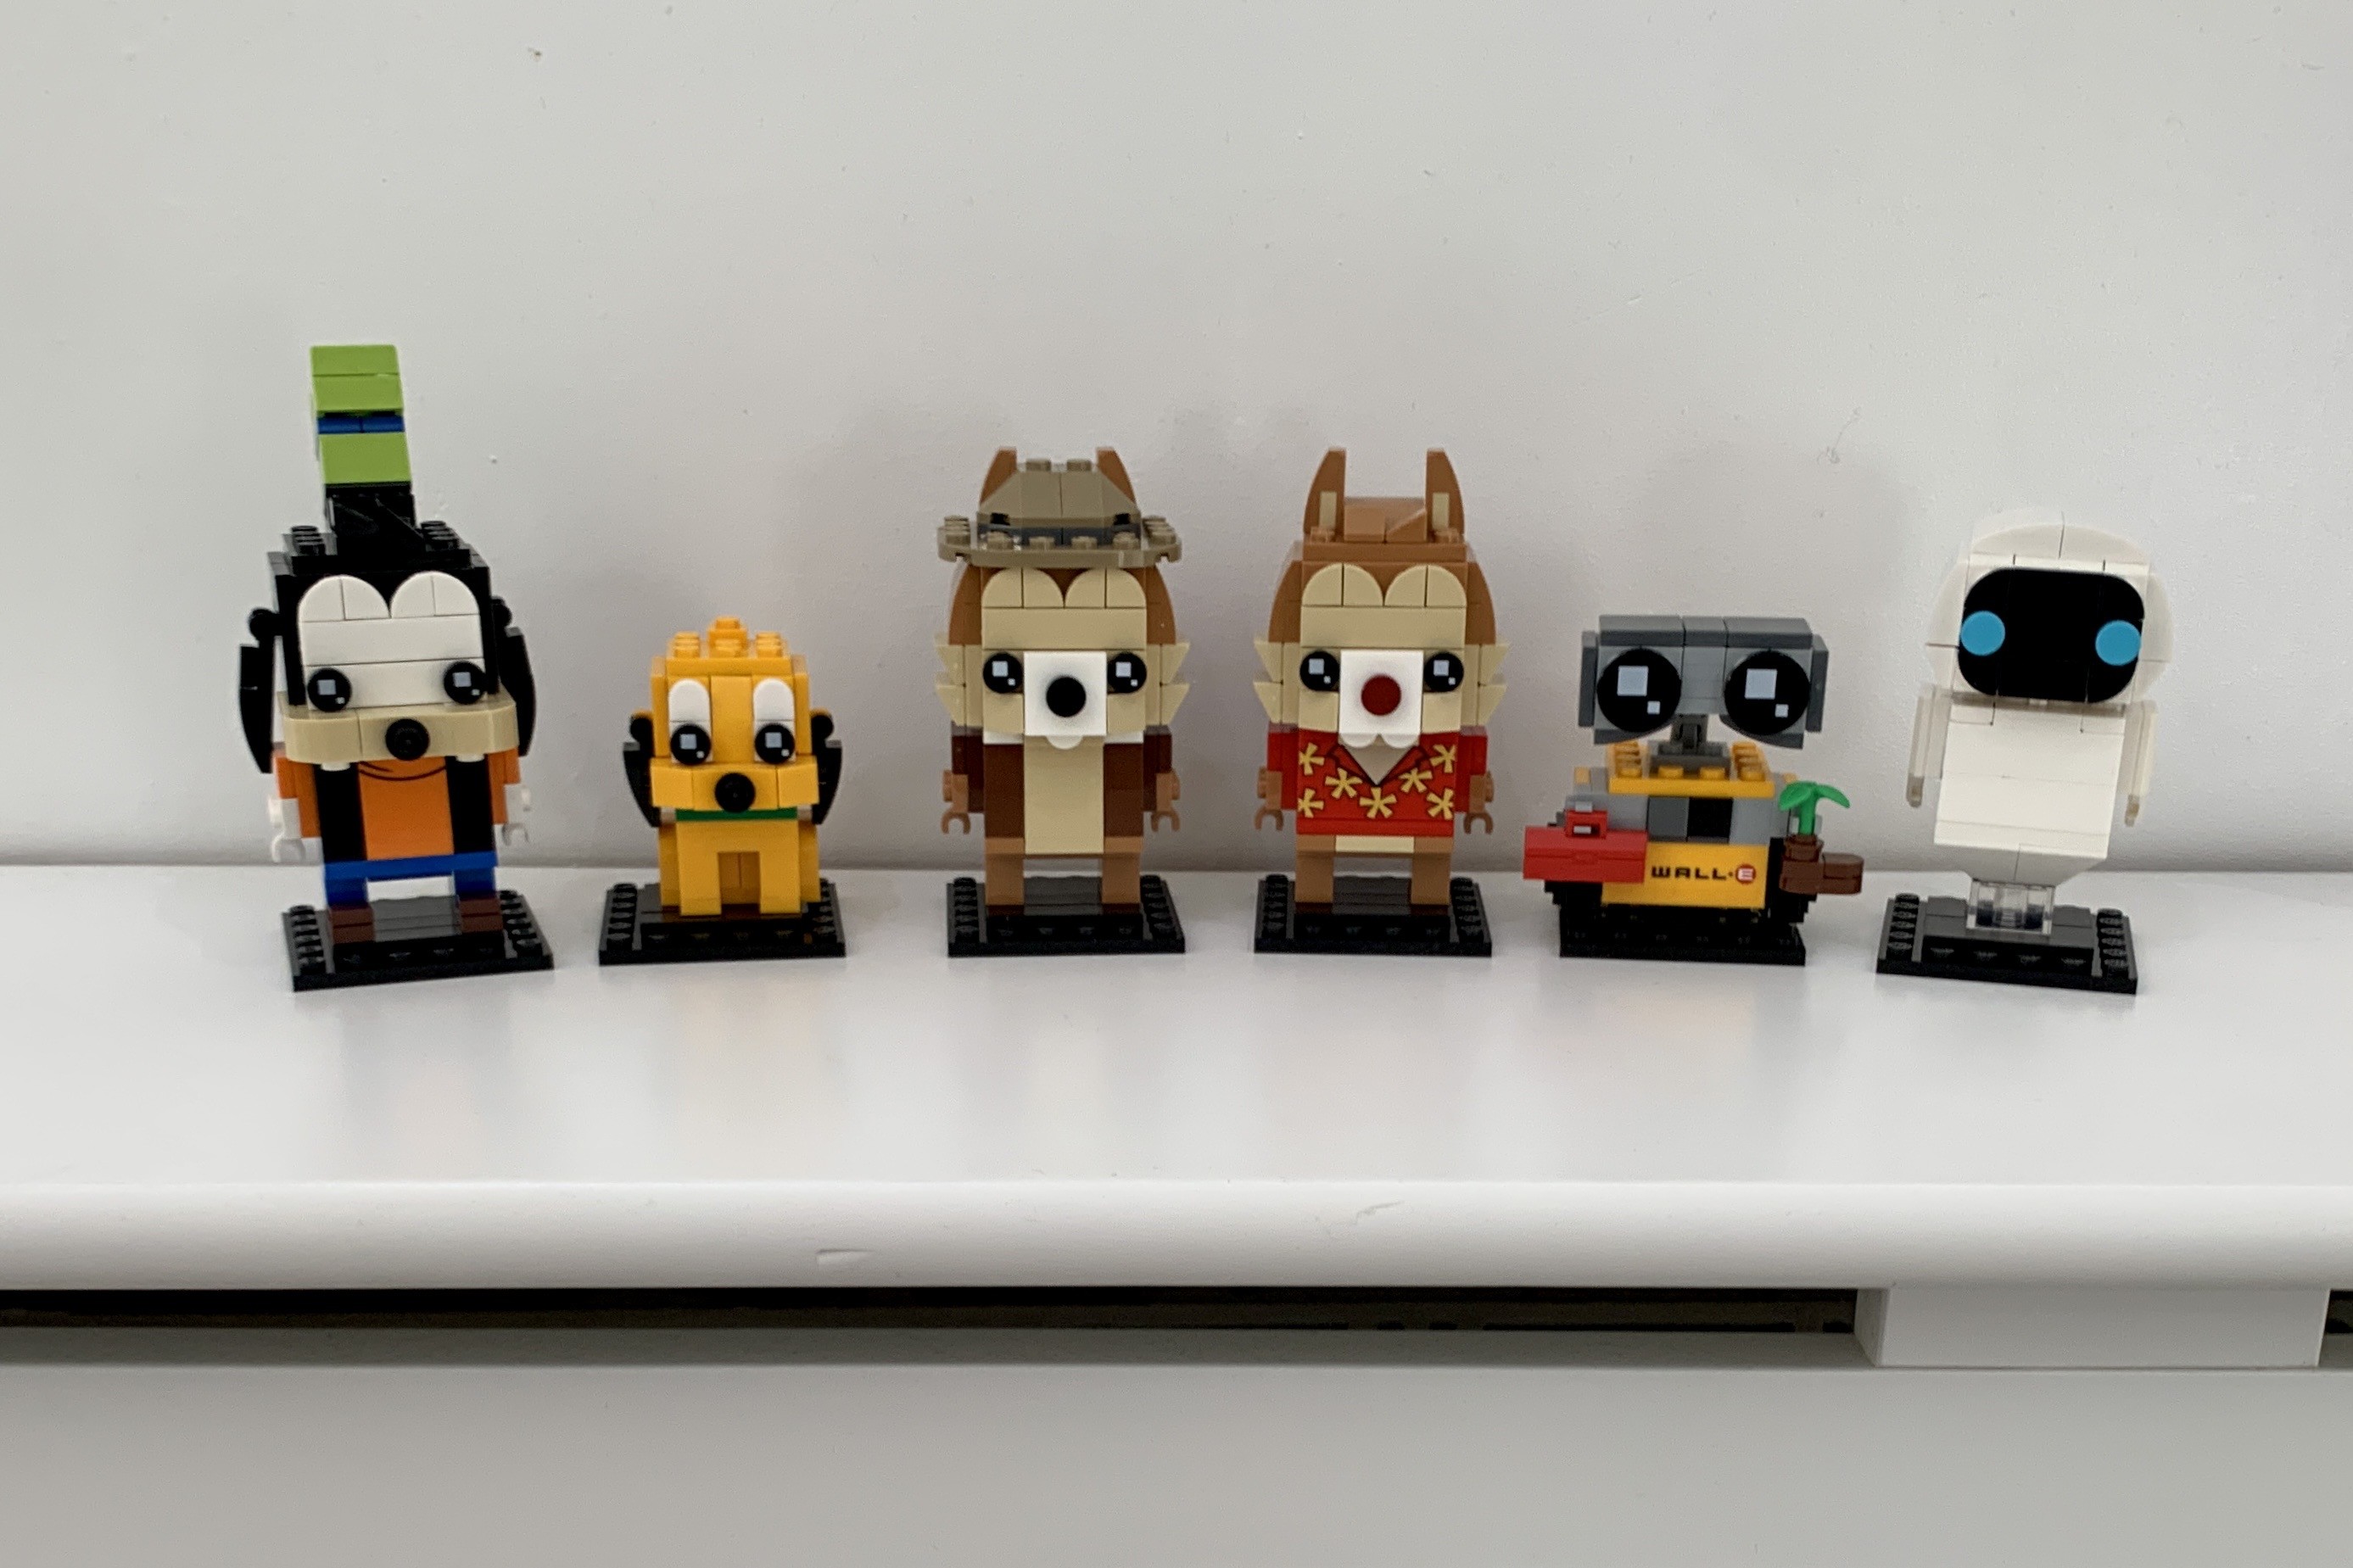 6 Lego BrickHeadz characters from Disney. Left to right: Goofy , Pluto, Chip, Dale, Wall-E and EVE